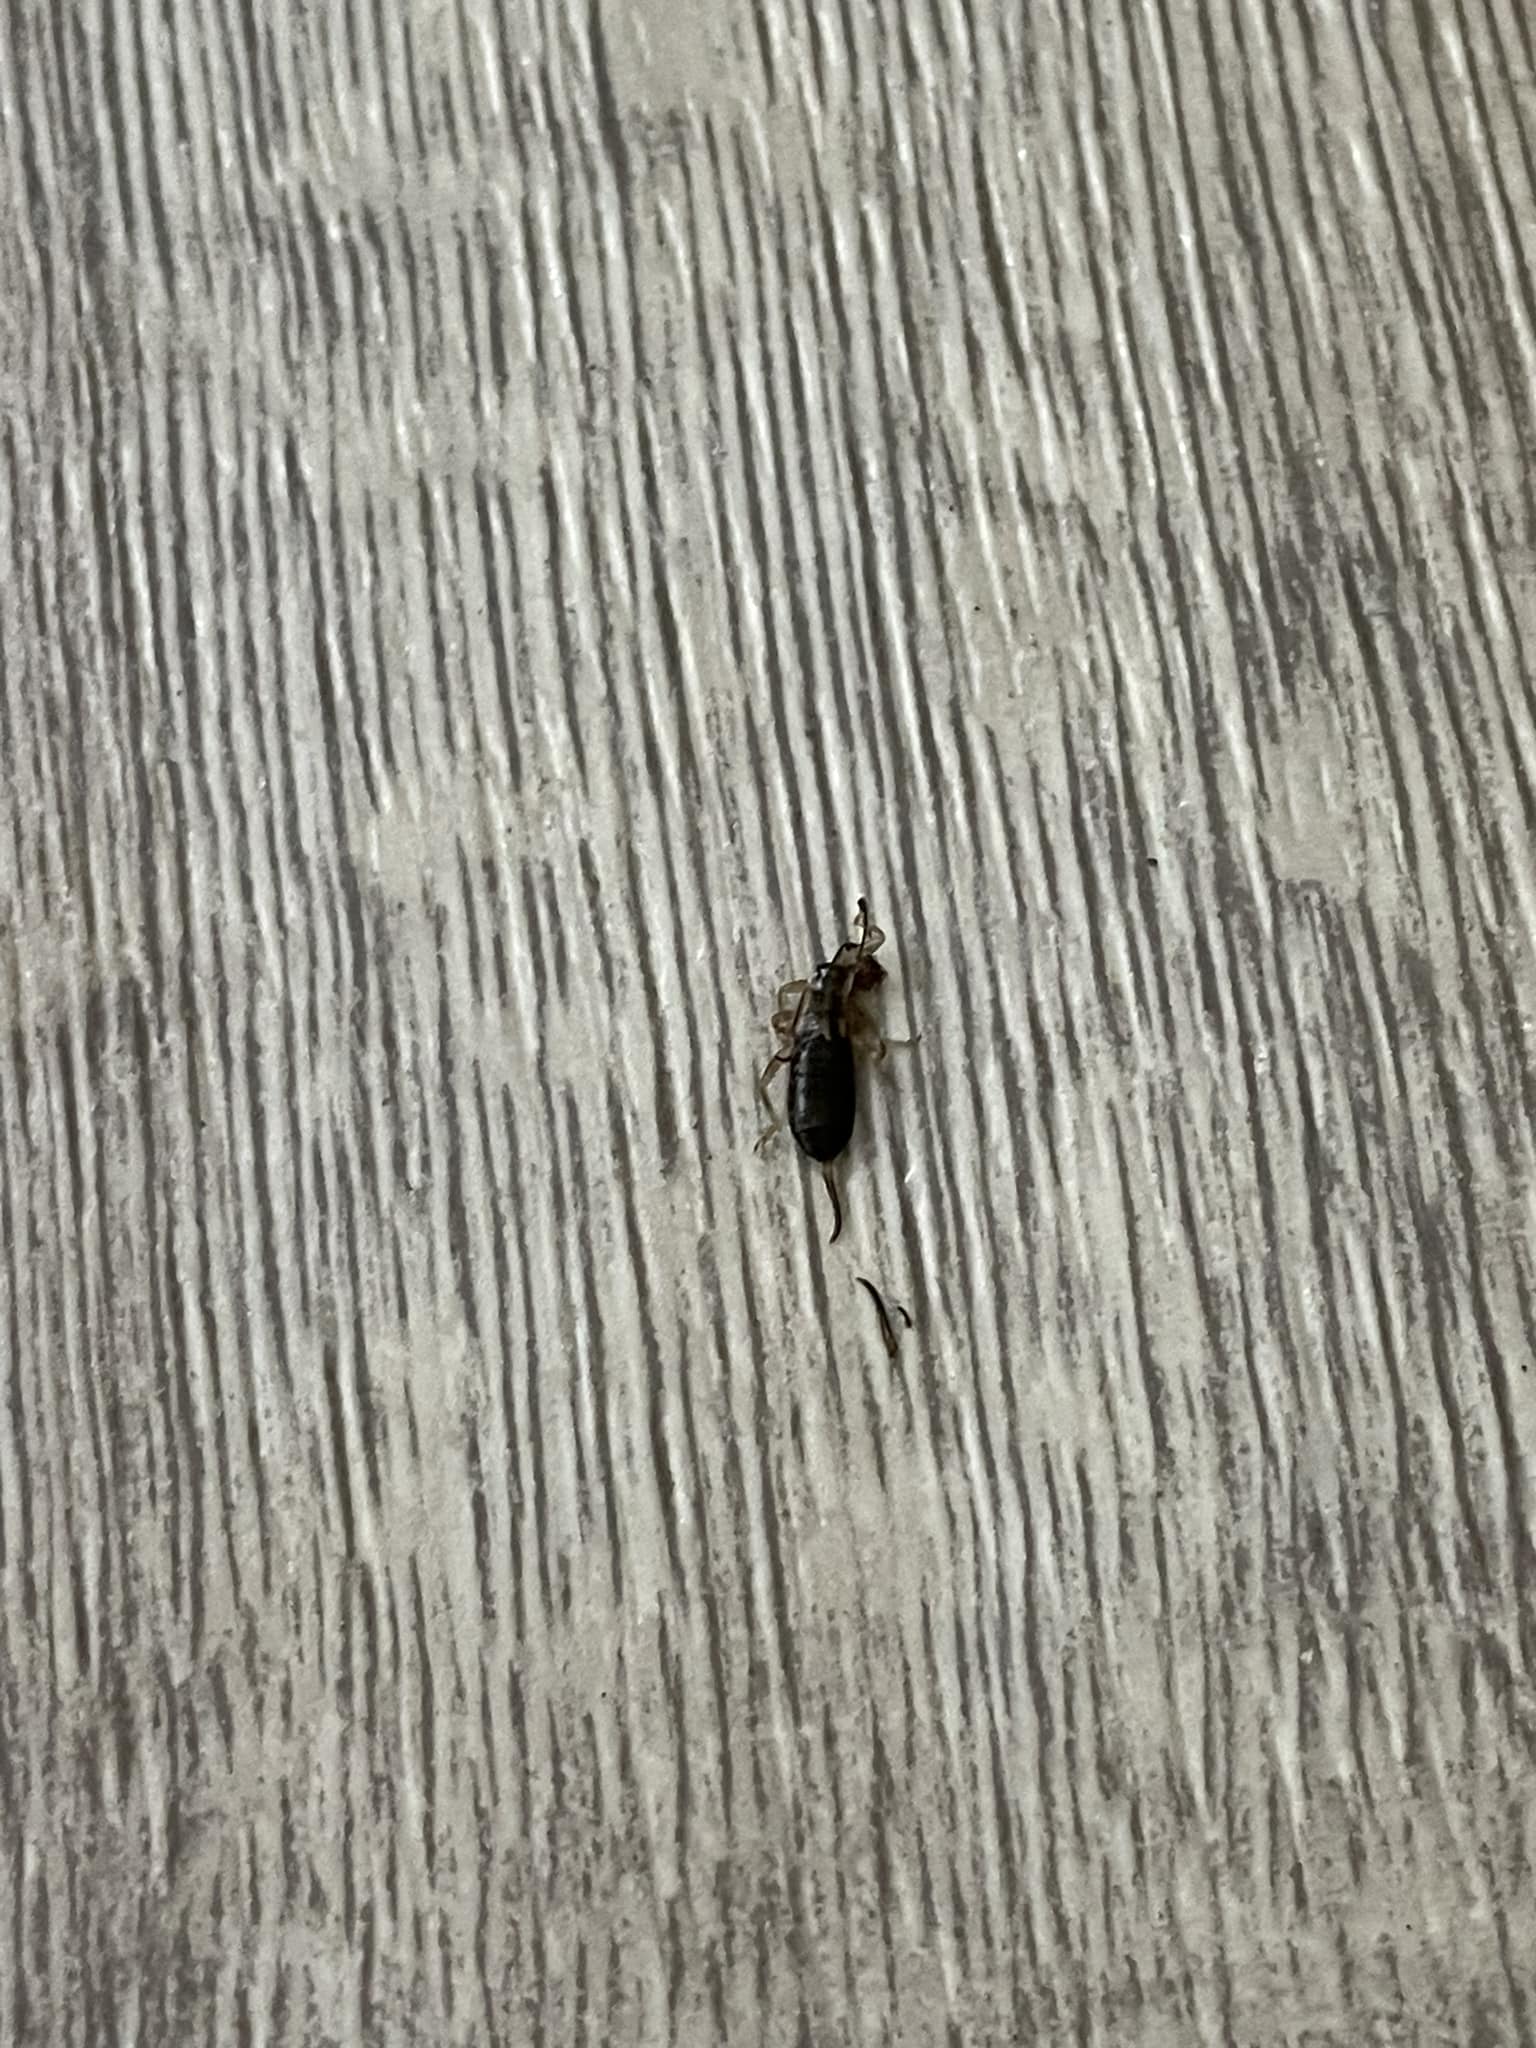 A dead insect lying on the wooden floor of a Dundee flat.